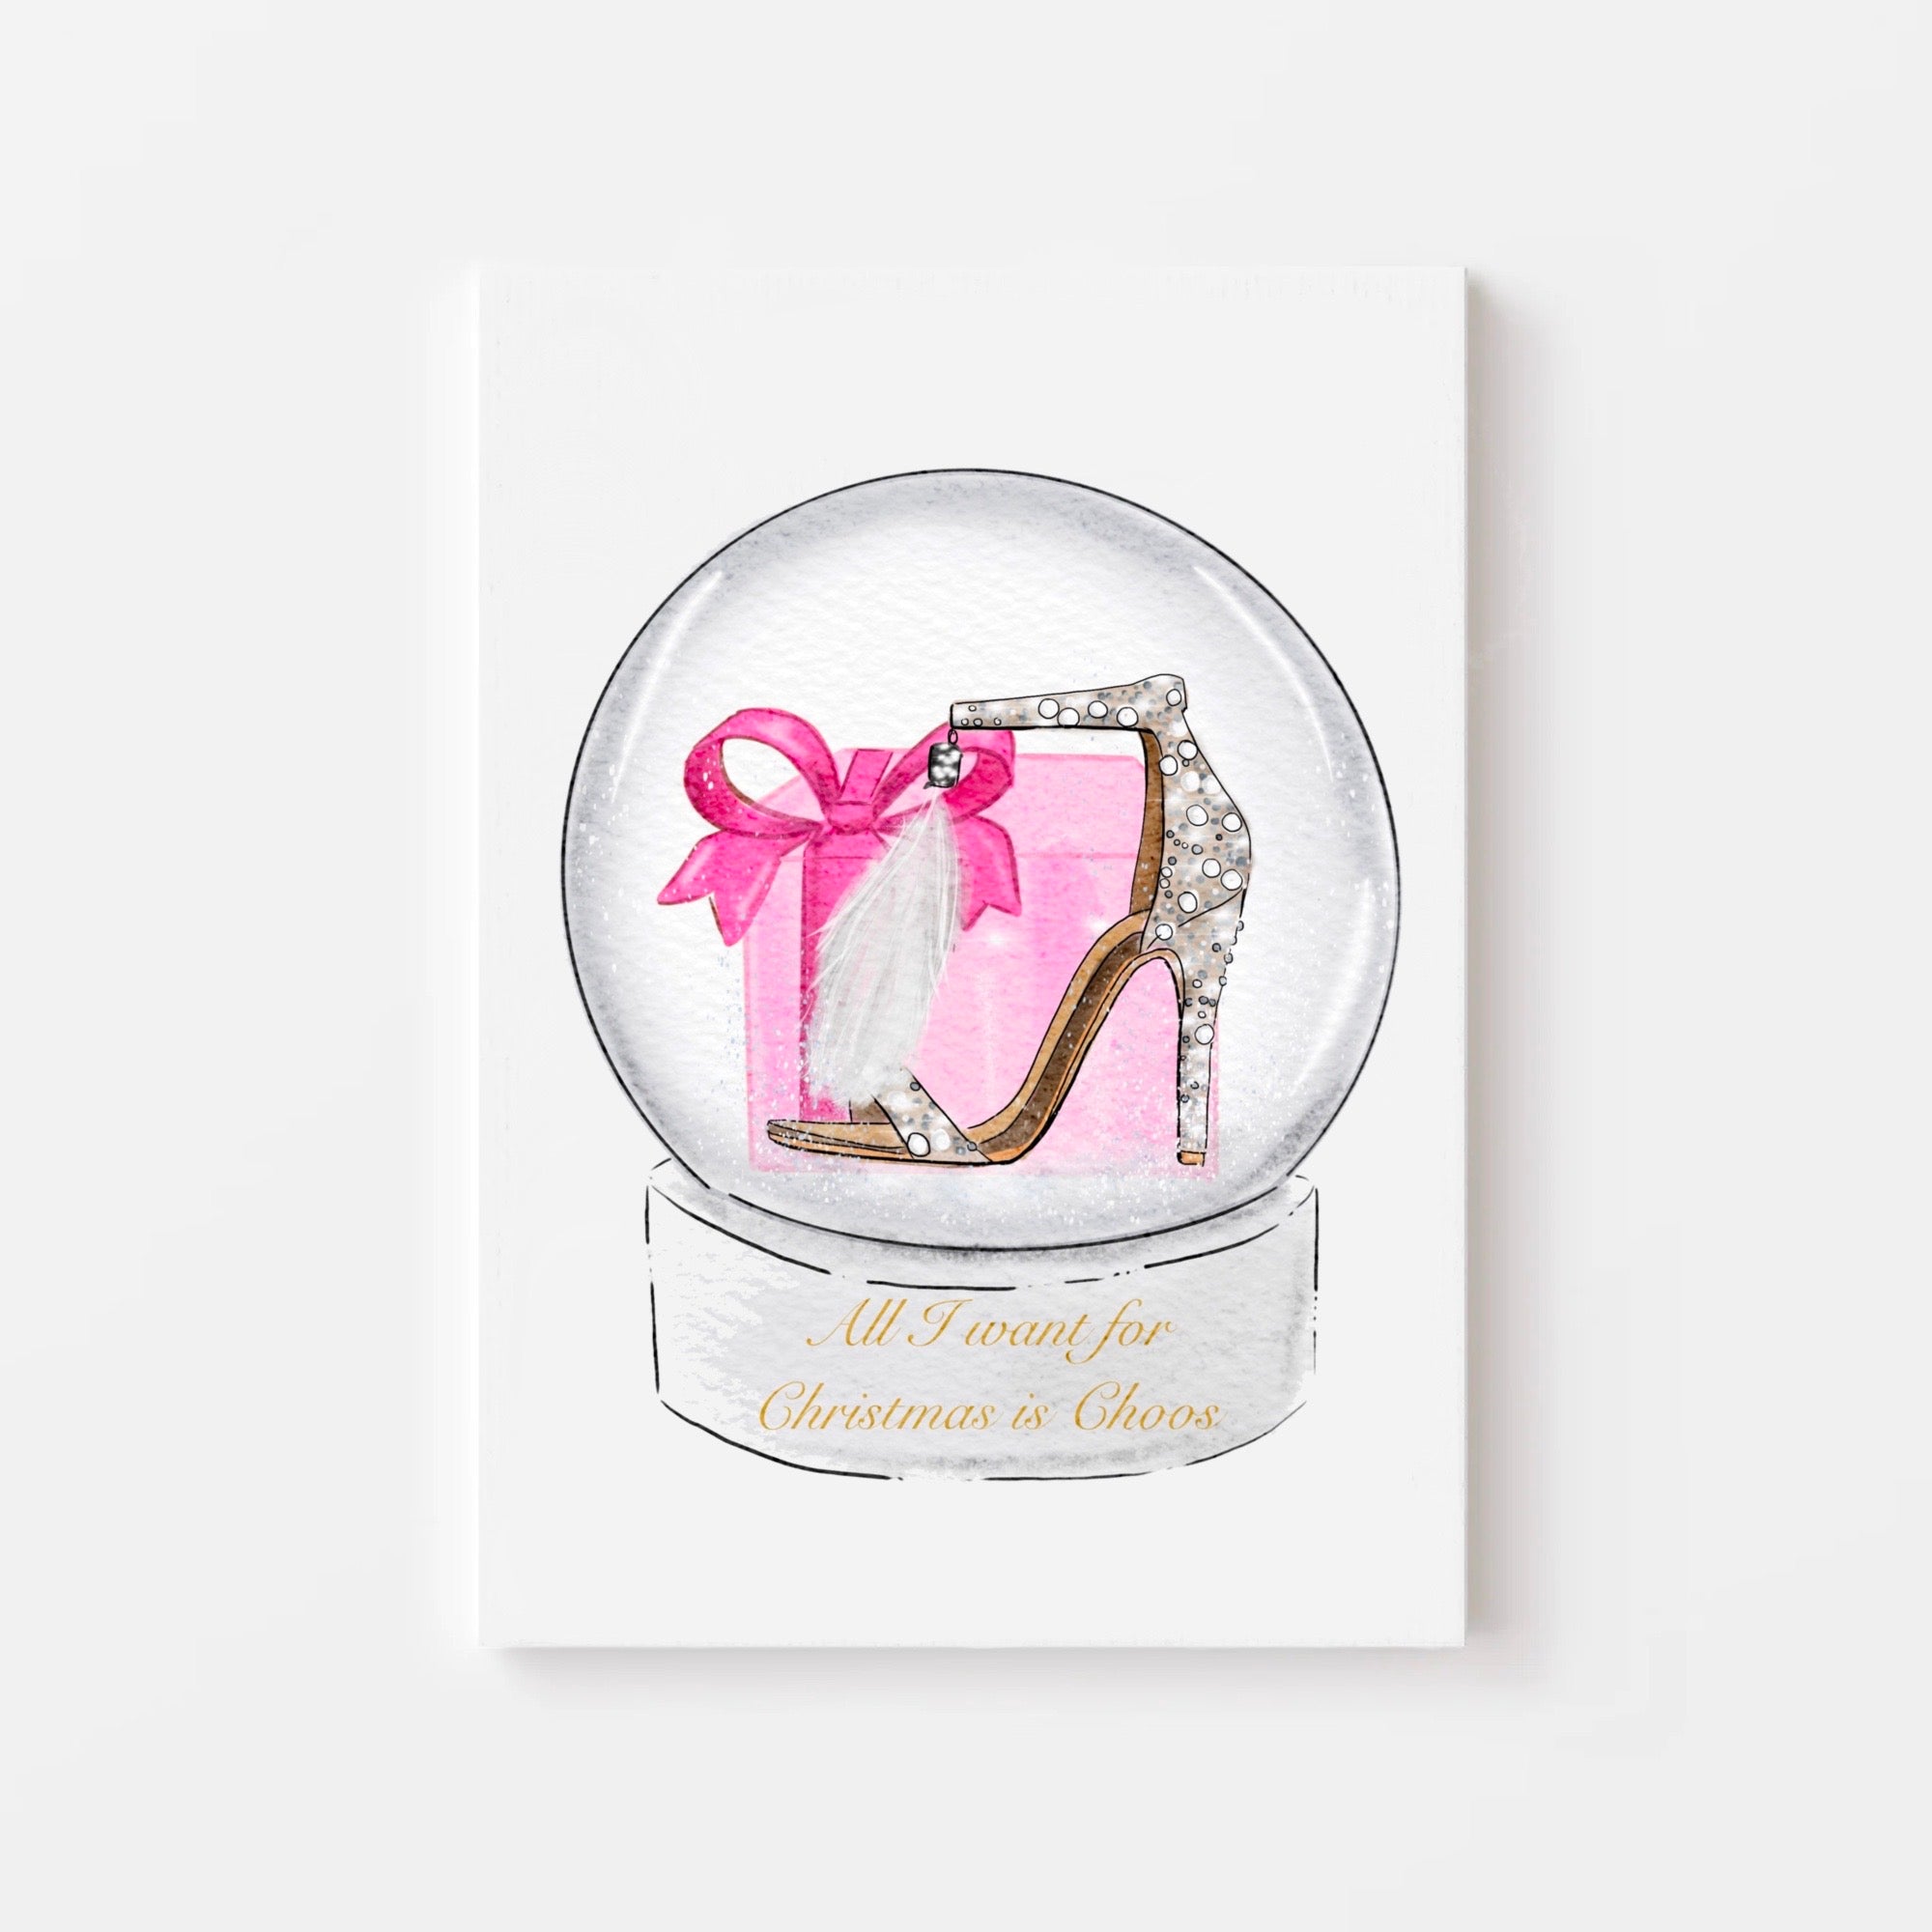 All I Want for Christmas is Choos - Shoe art print (pink)